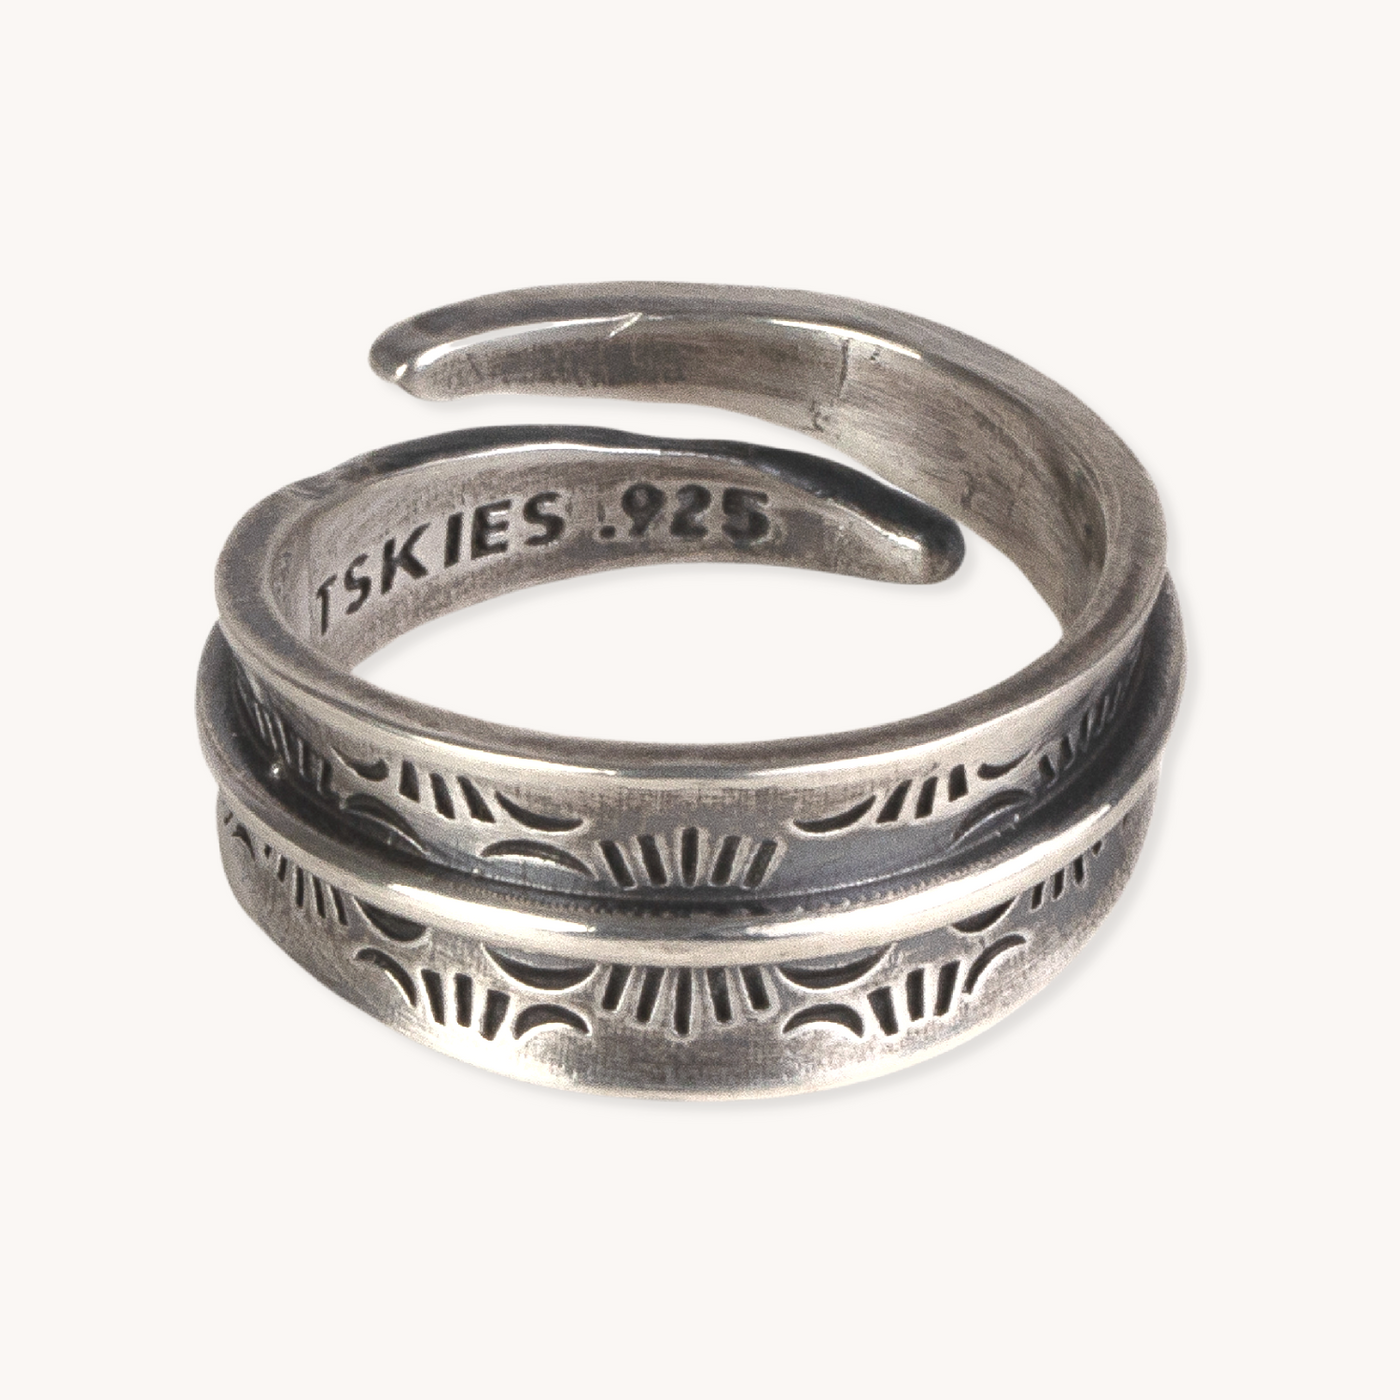 Silver Adjustable Wrap Ring by TSkies Jewelry